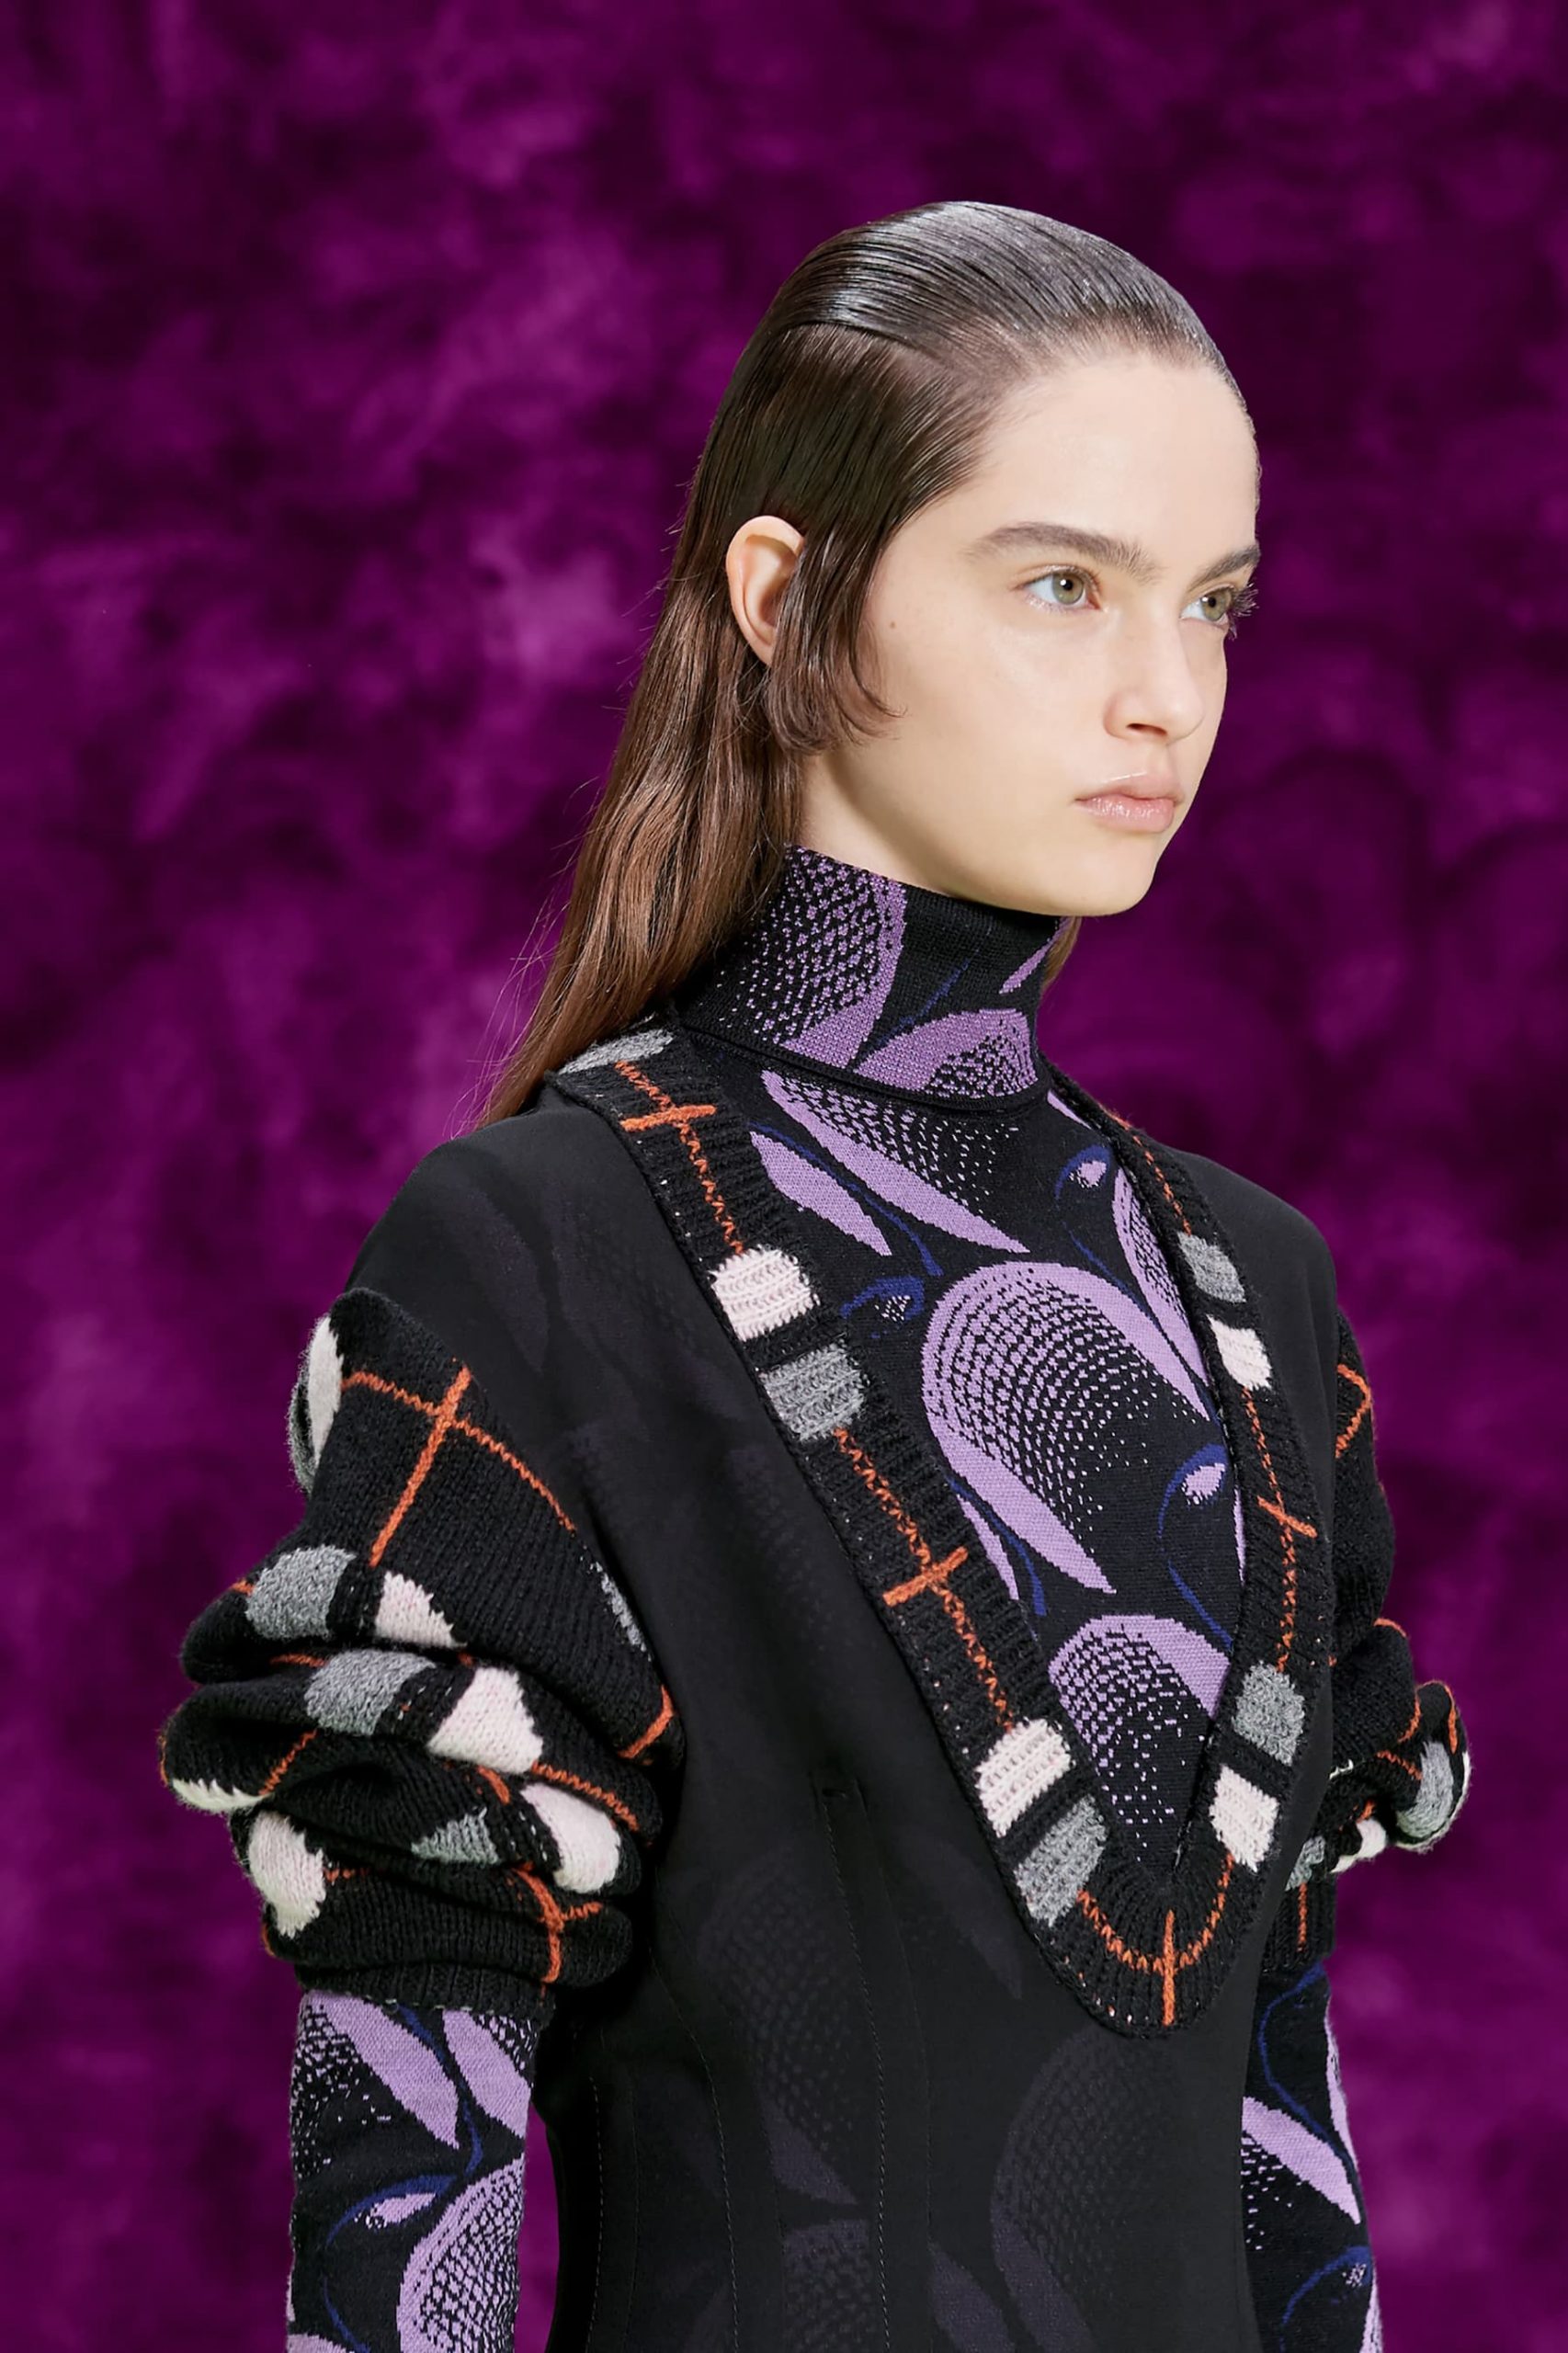 Prada Possible Feelings FW 21/22: what are the feelings you can